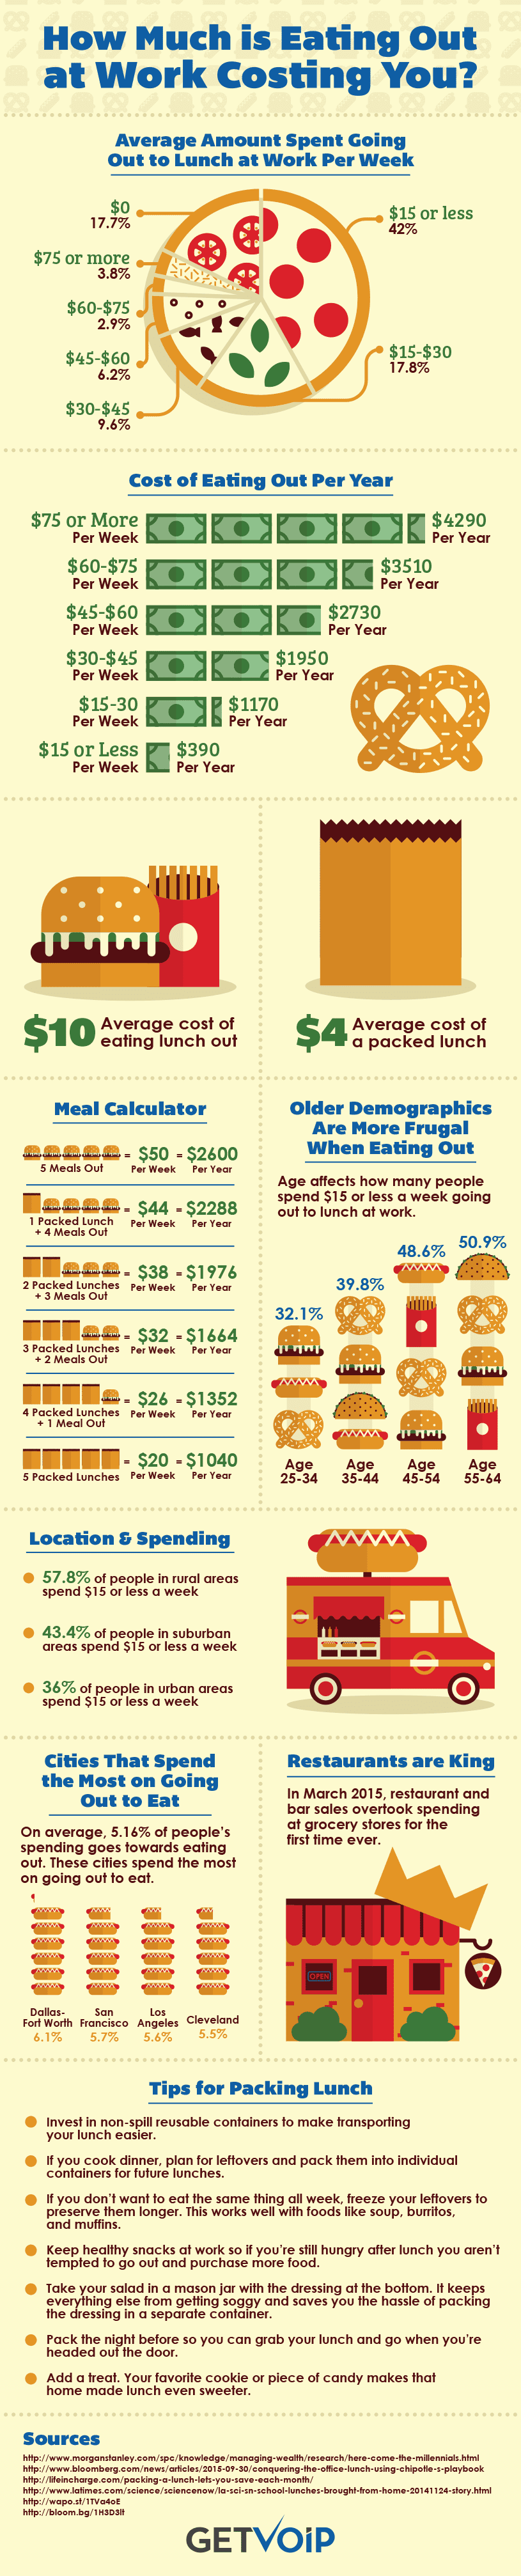 How-Much-is-Eating-Out-at-Work-Costing-You-Infographic